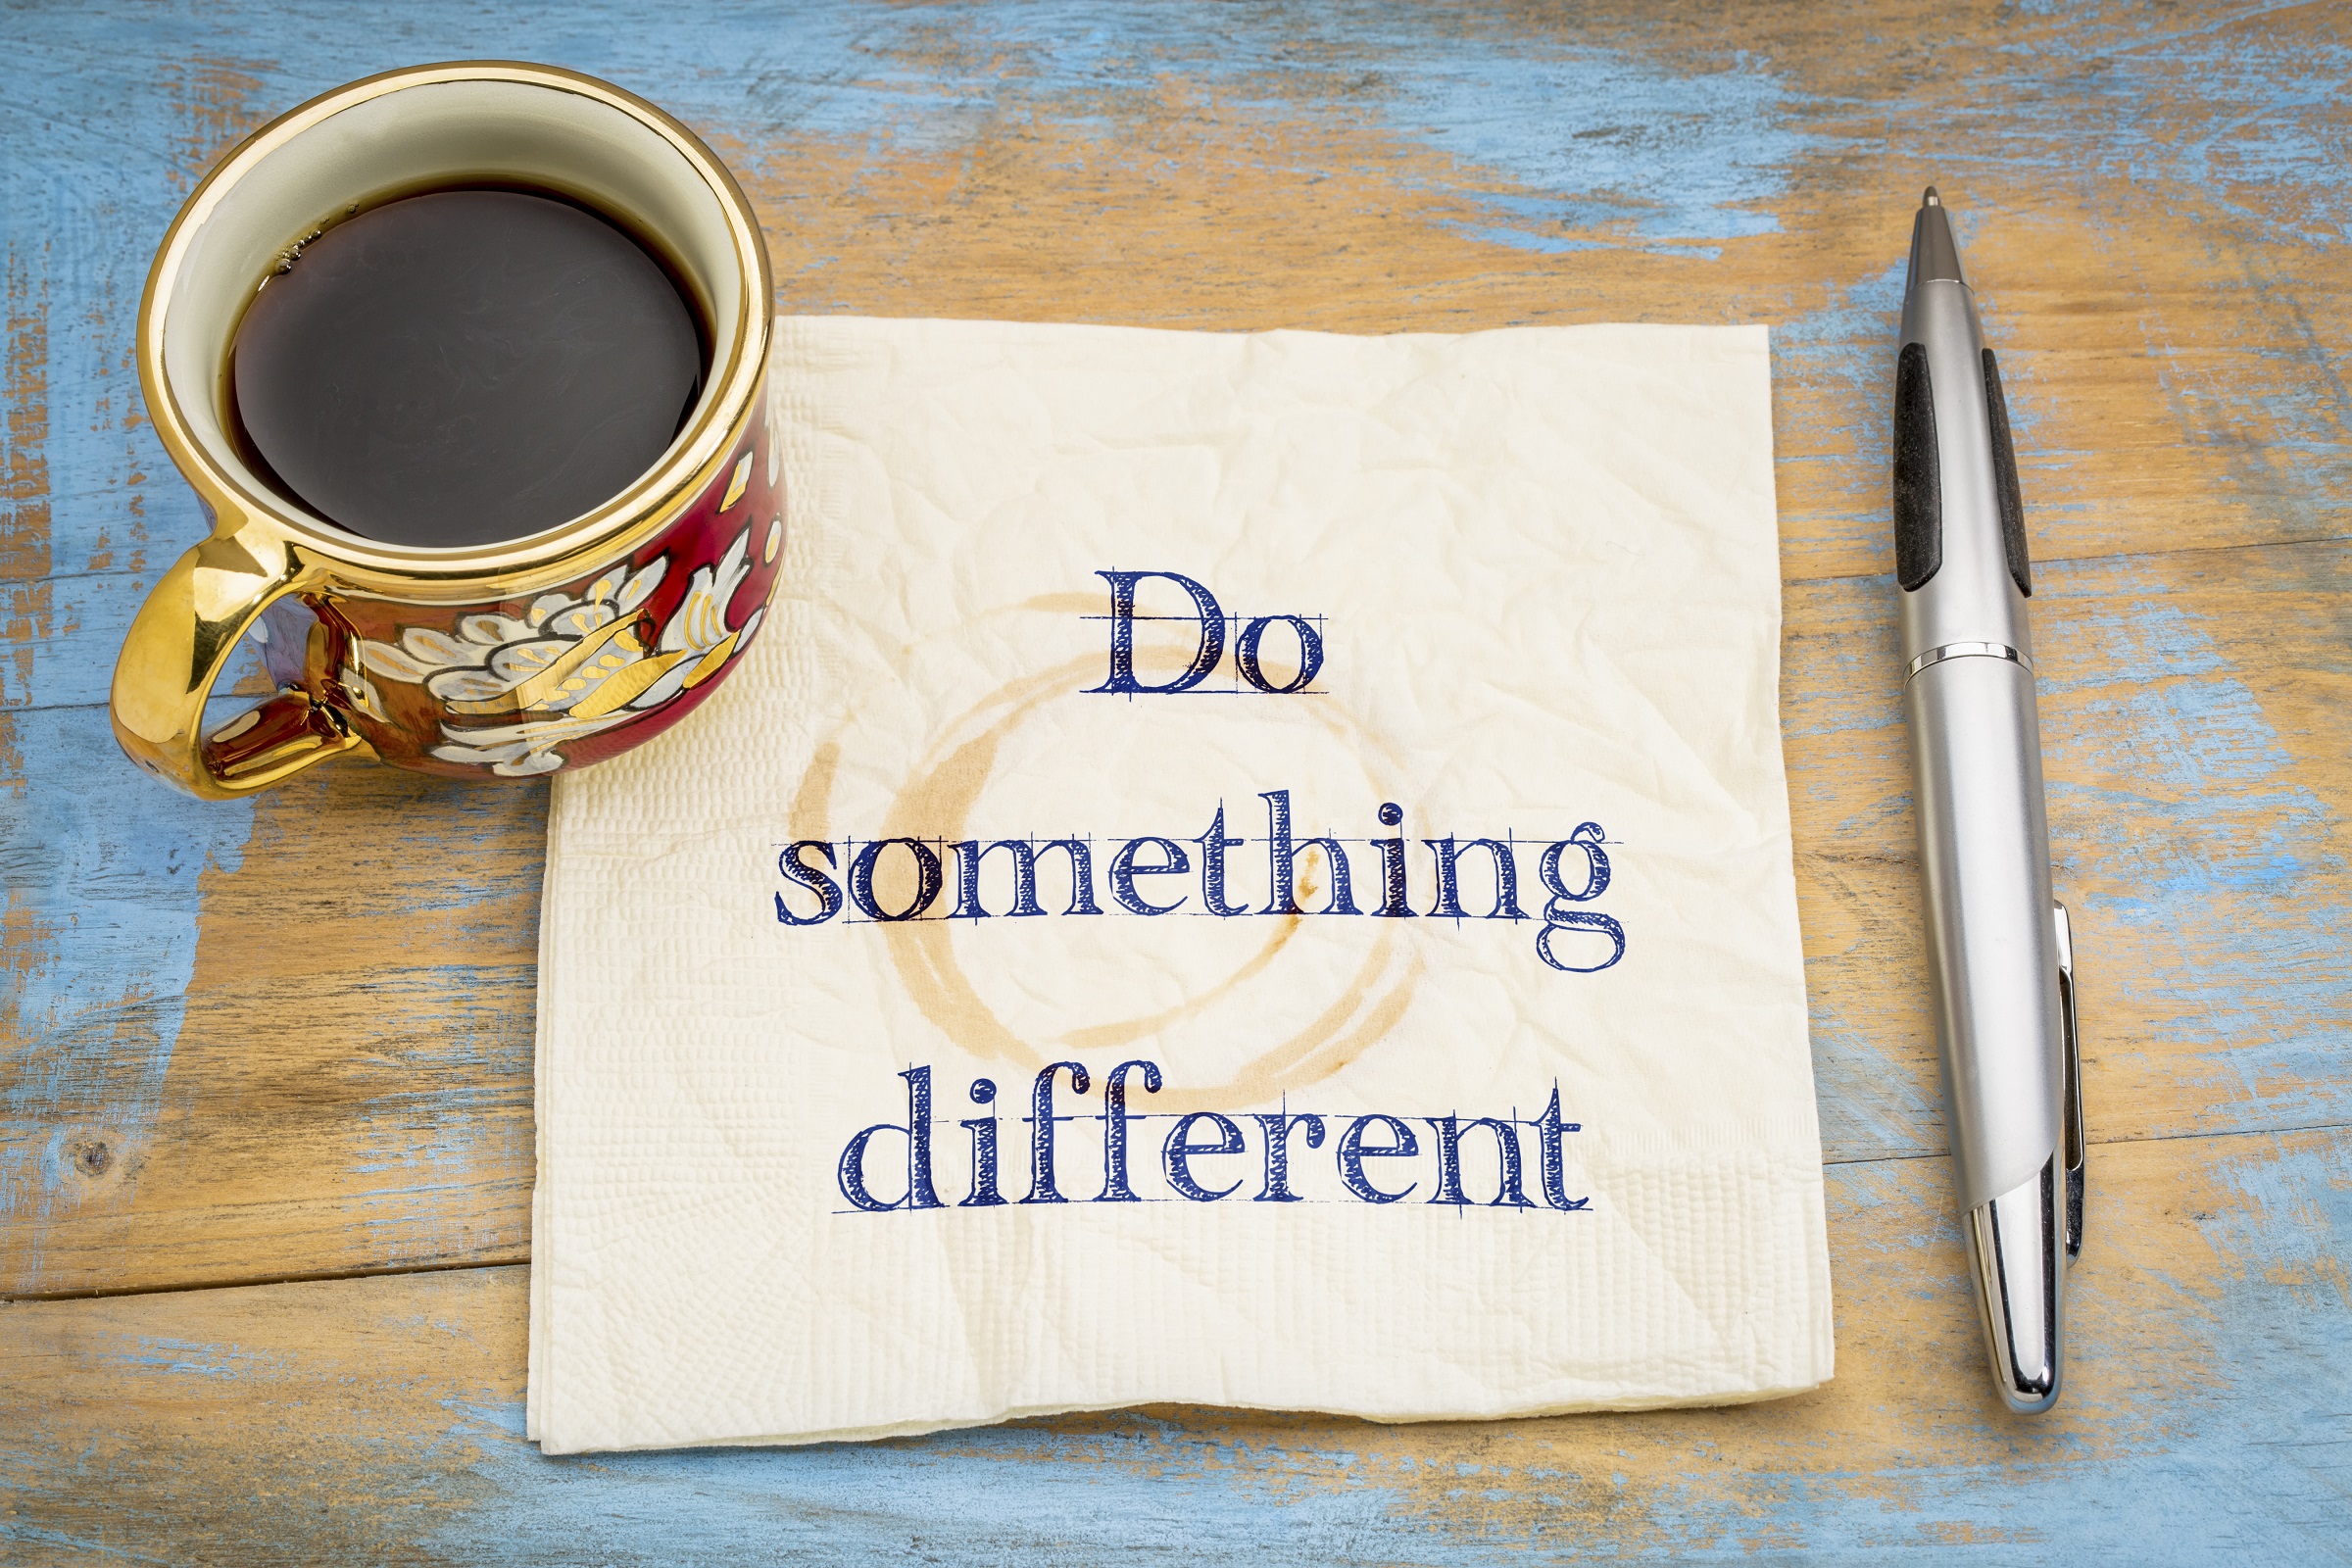 Do something different advice - handwriting on a napkin with a cup of coffee